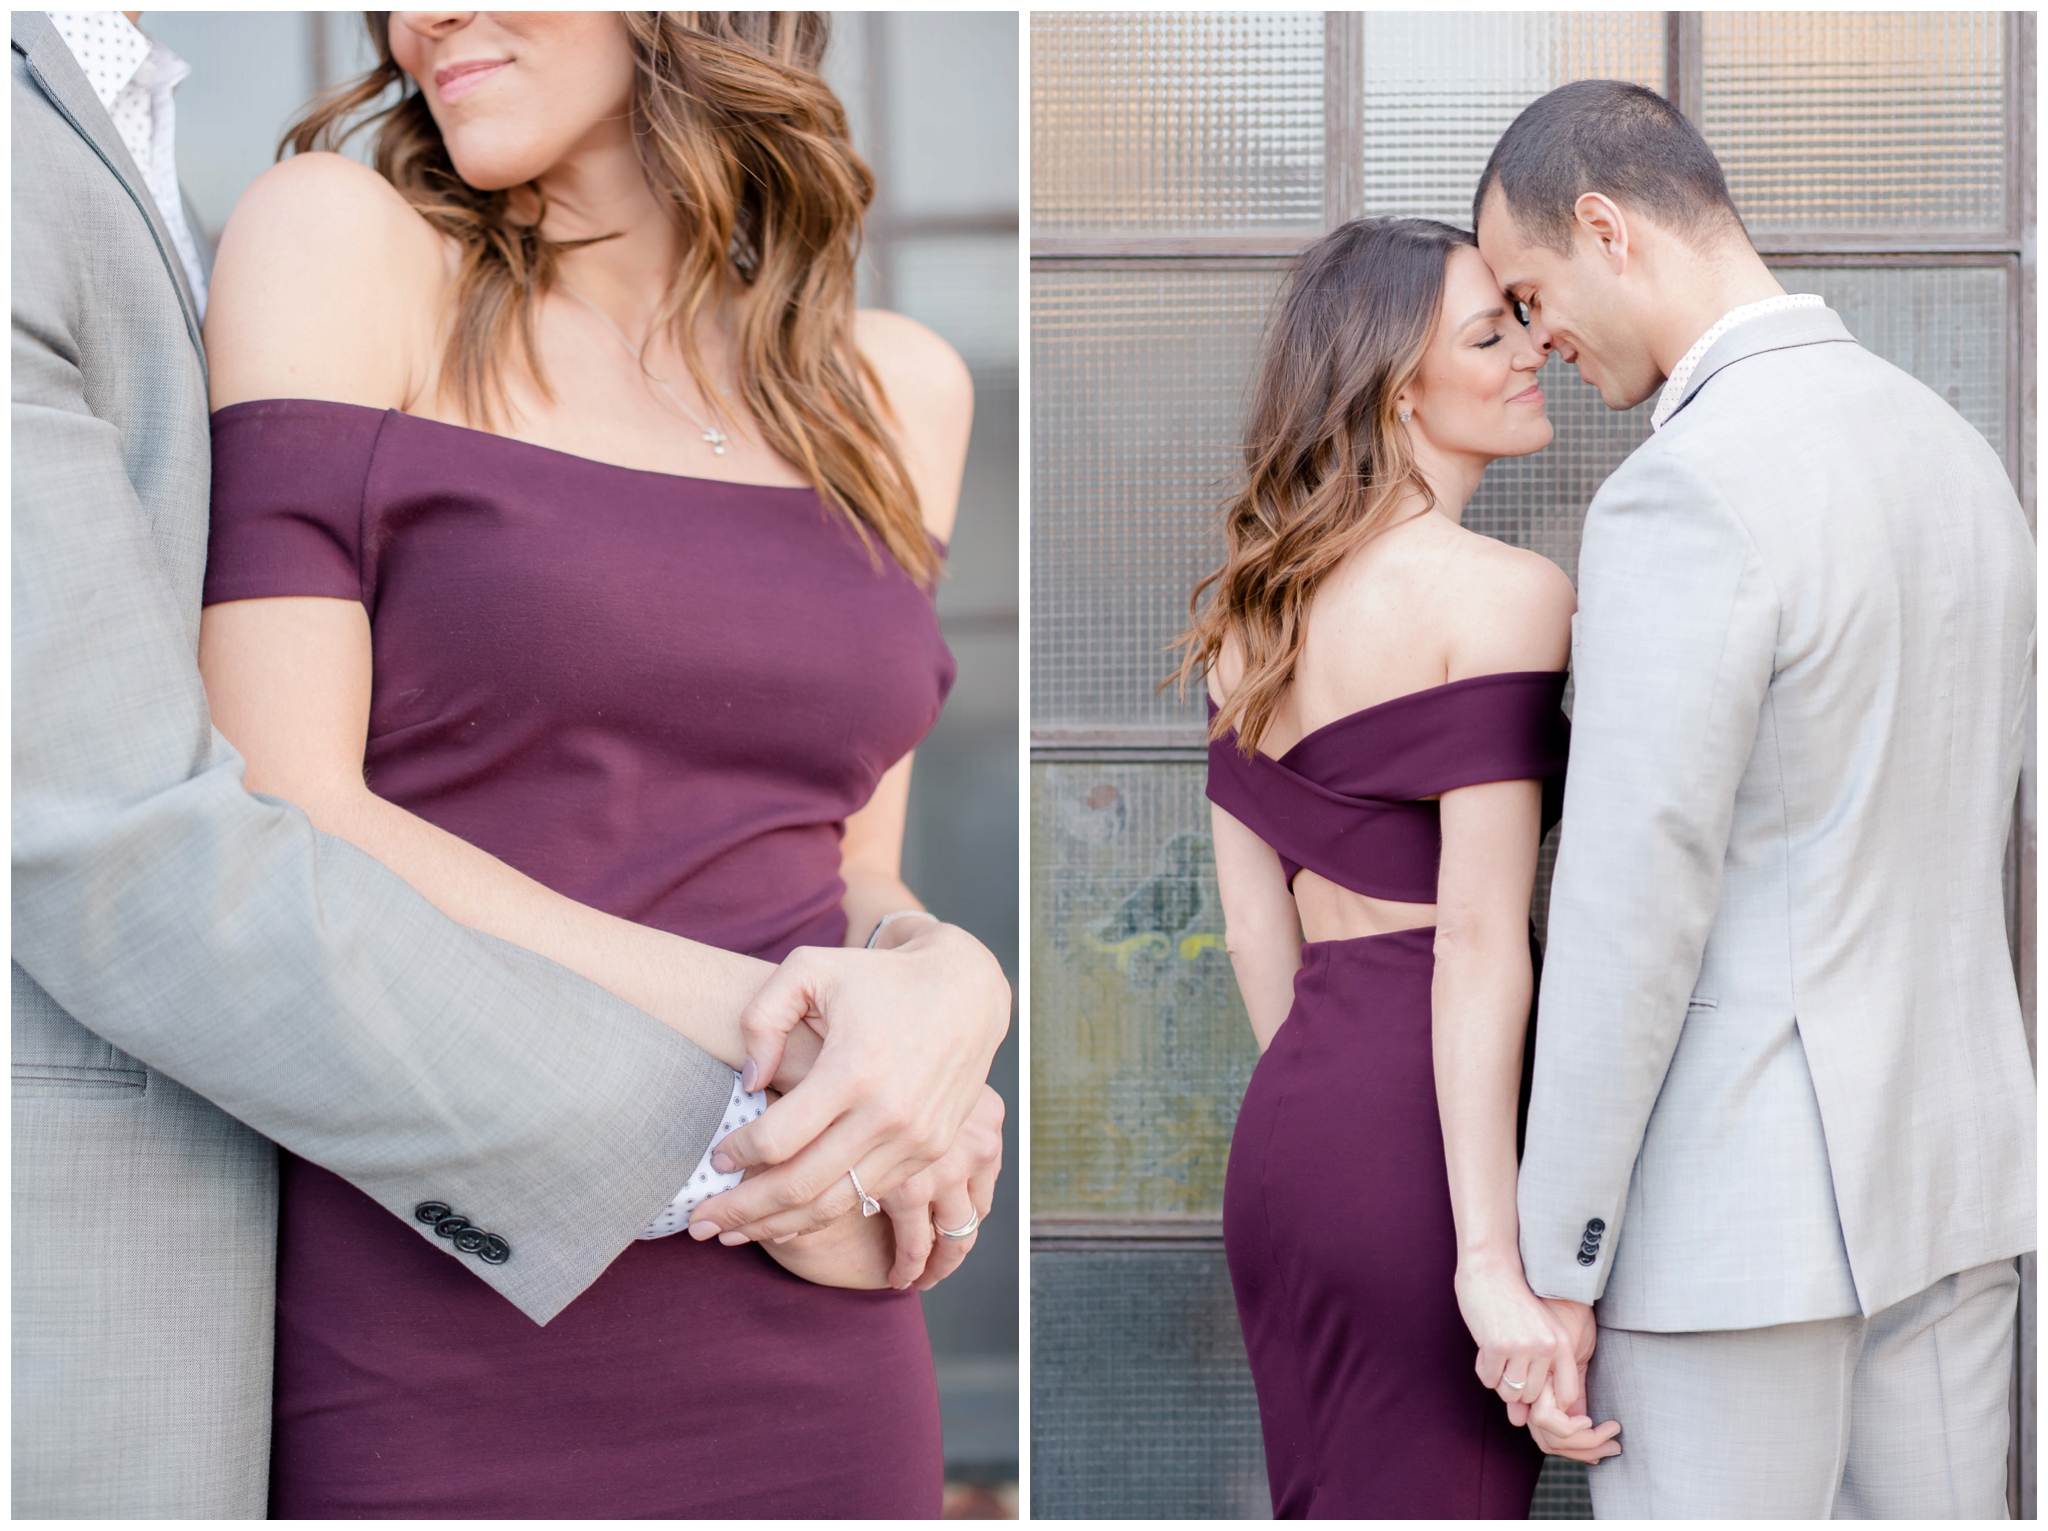 Hoboken Engagement Session - Laura Lee Photography